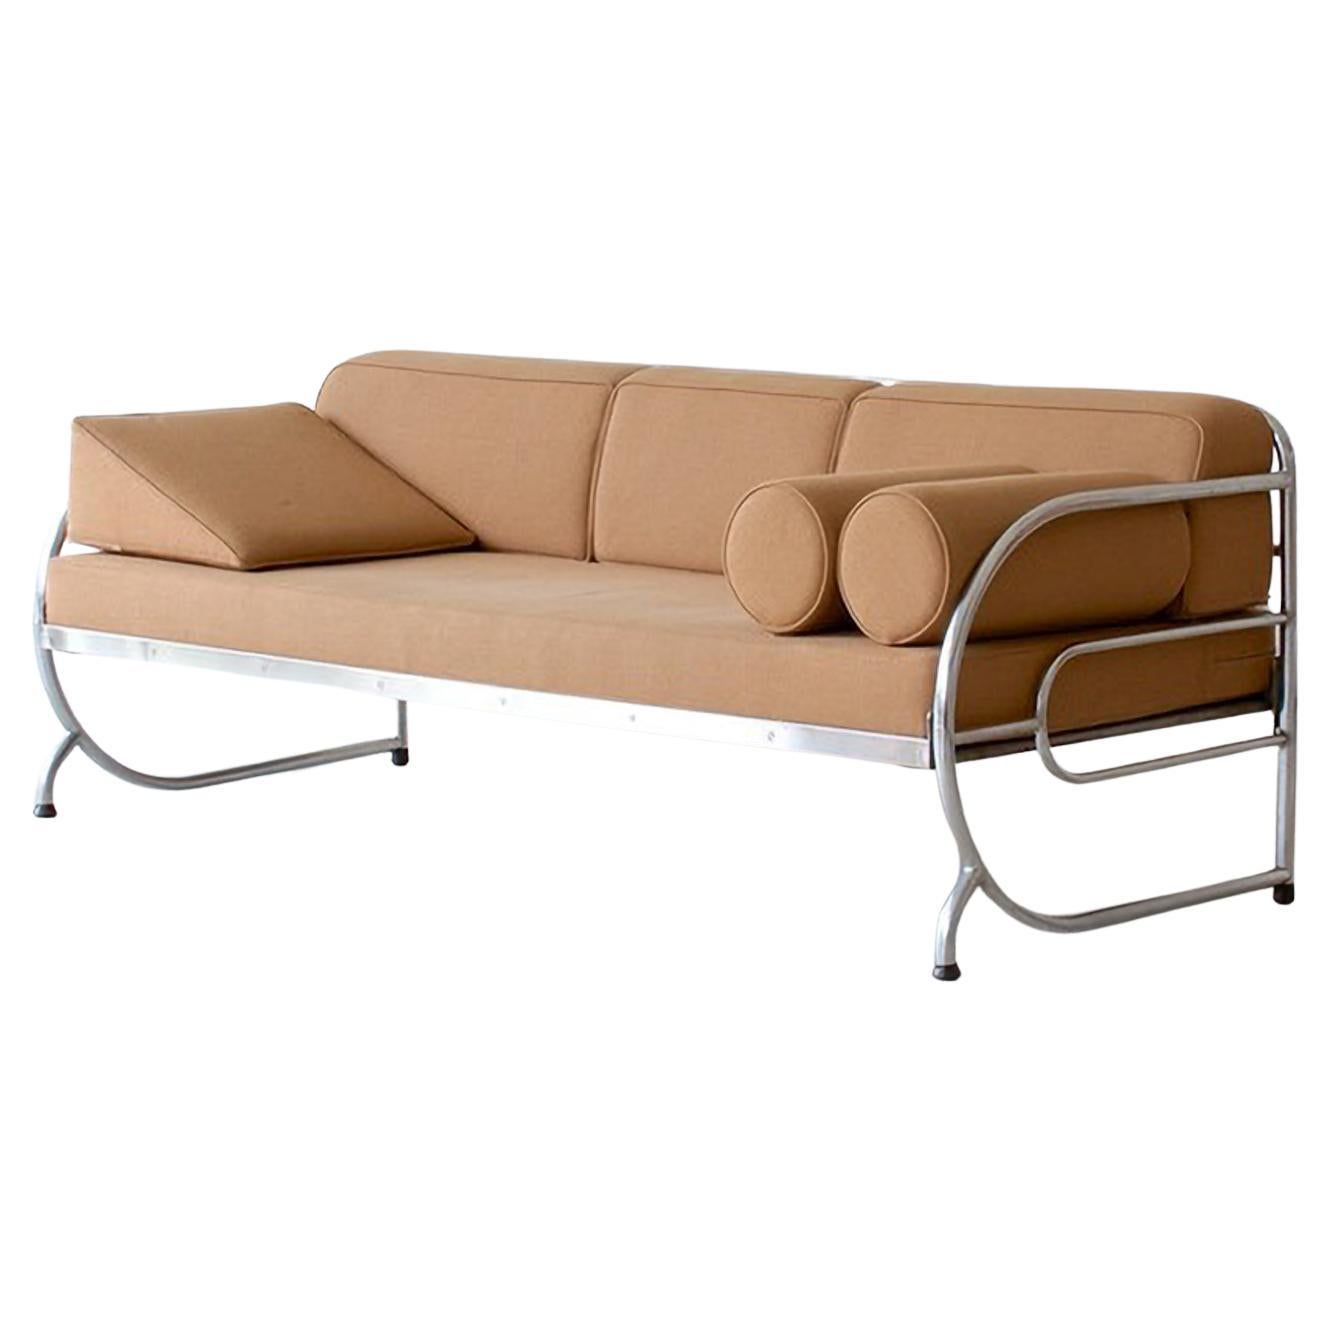 Tubular Steel Couch / Daybed in Art Deco Streamline Design, circa 1930